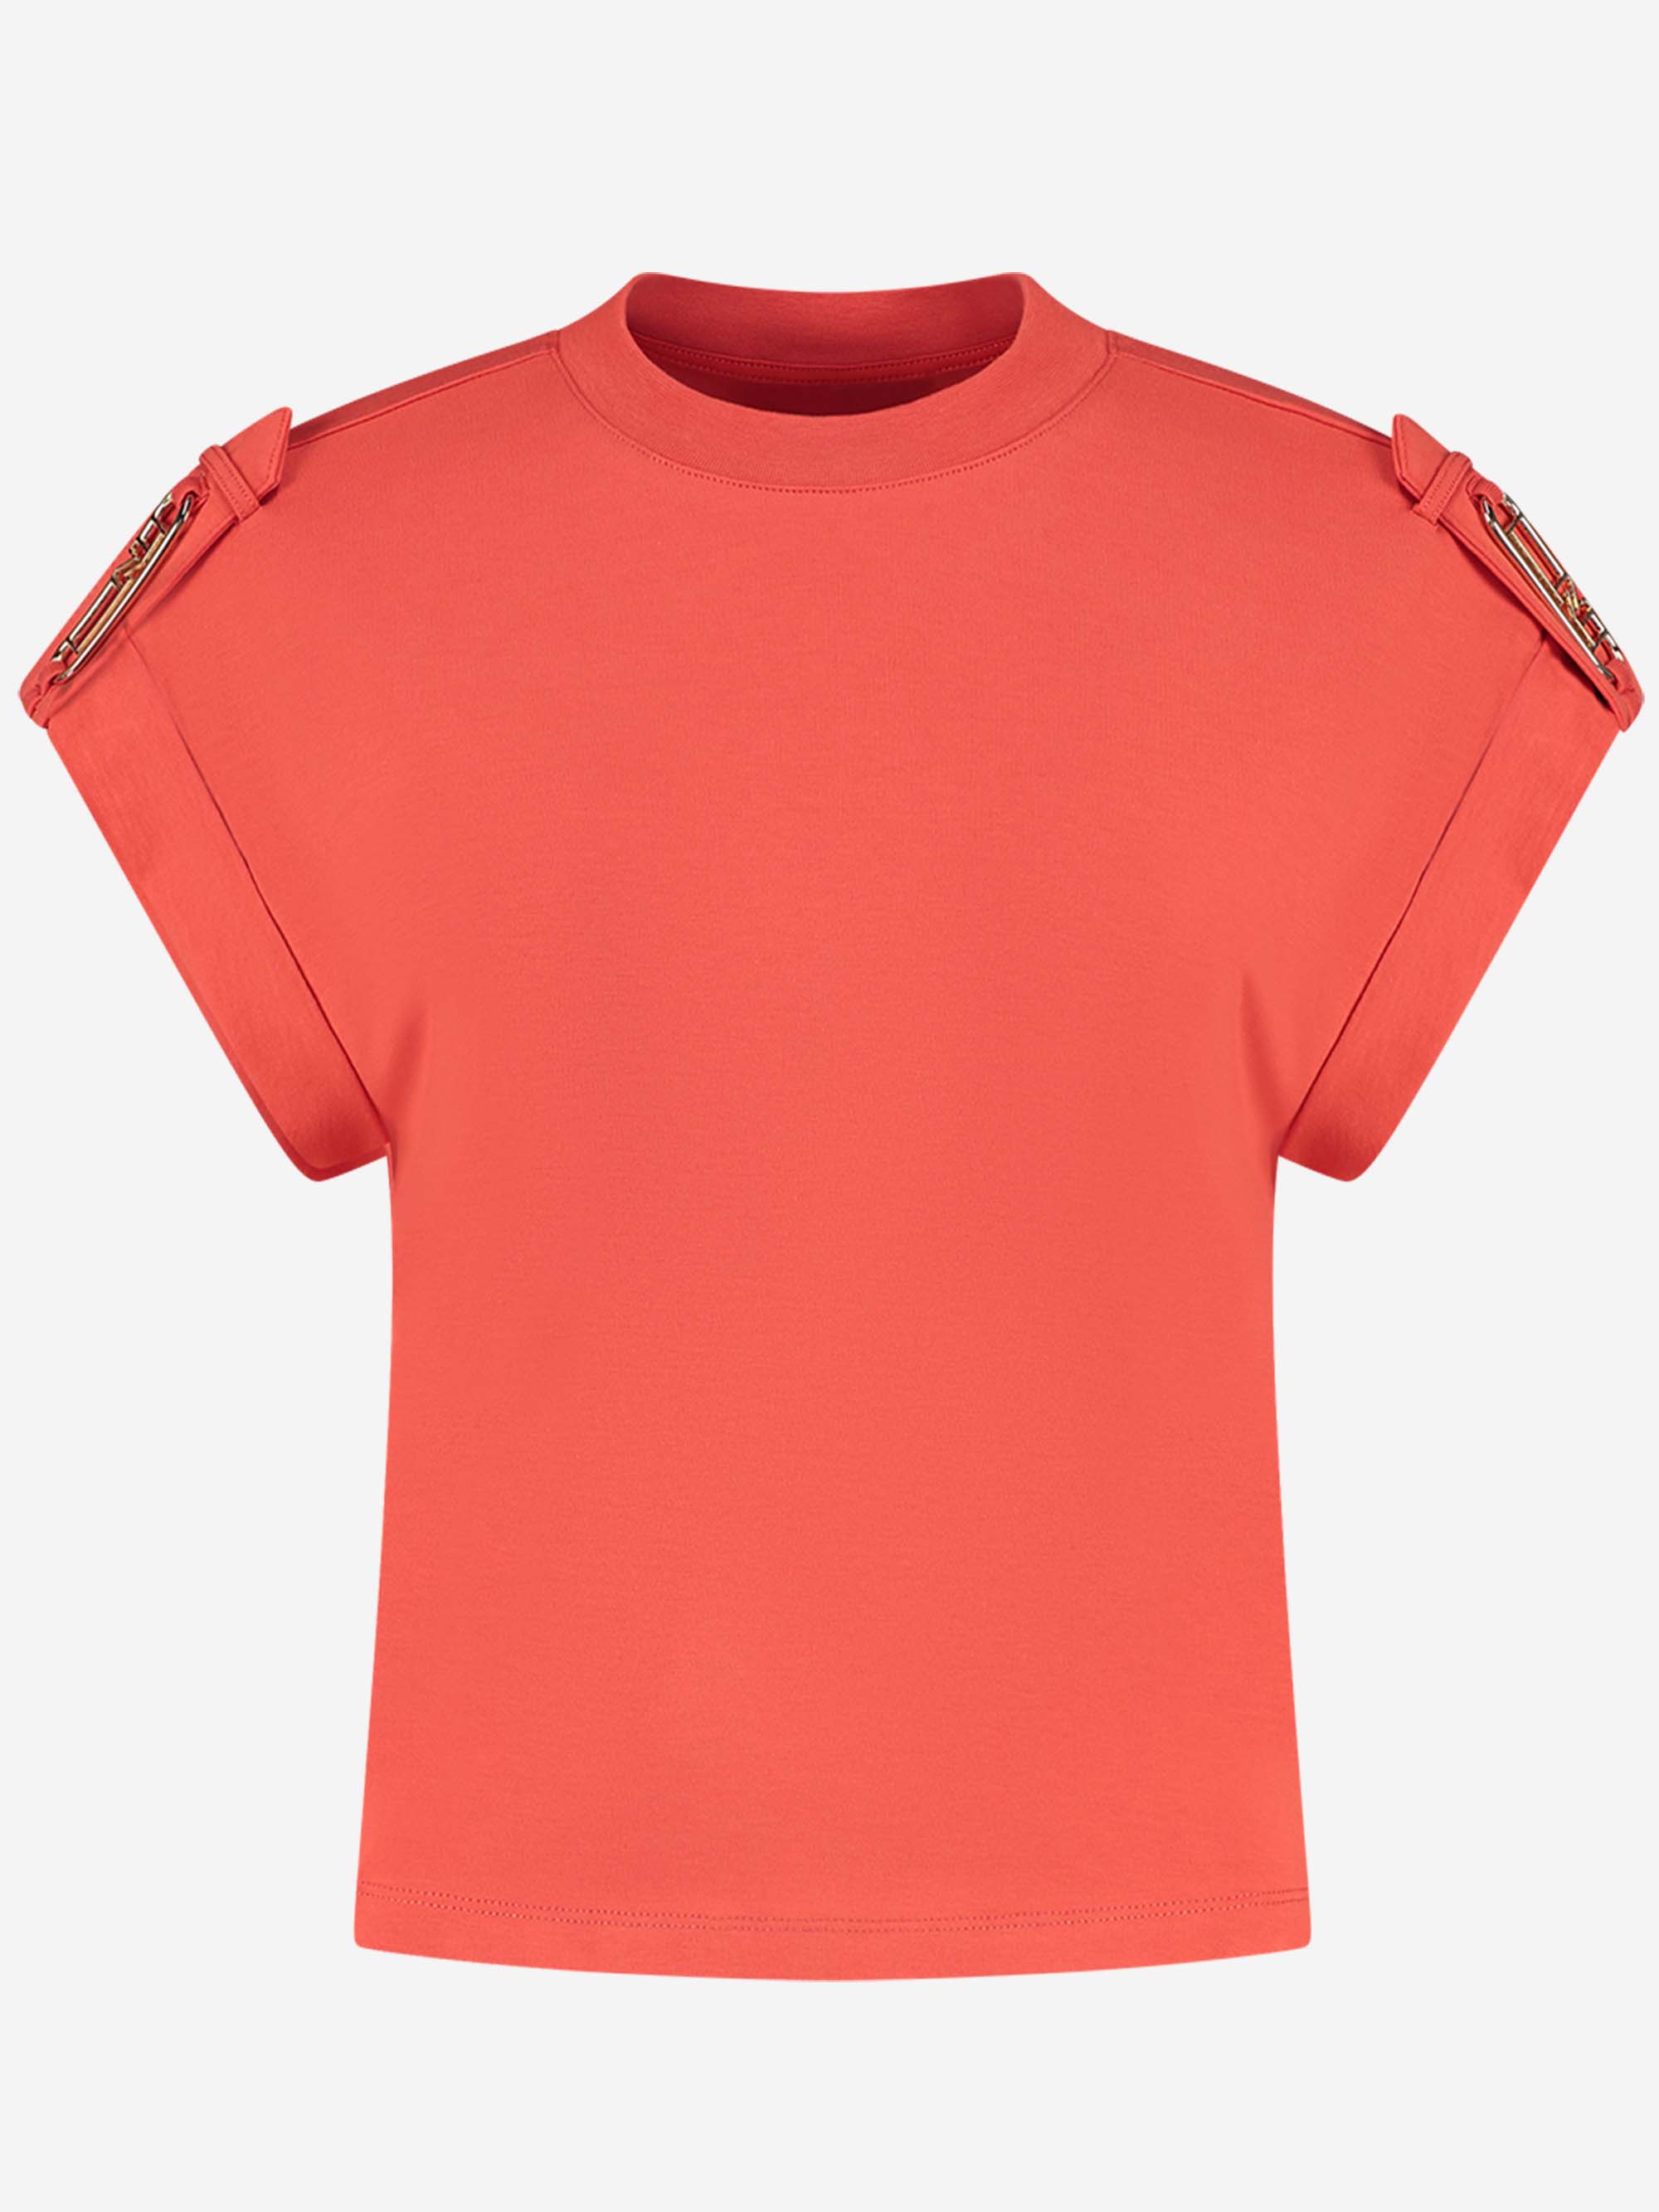 loose fit t-shirt with roll up sleeves